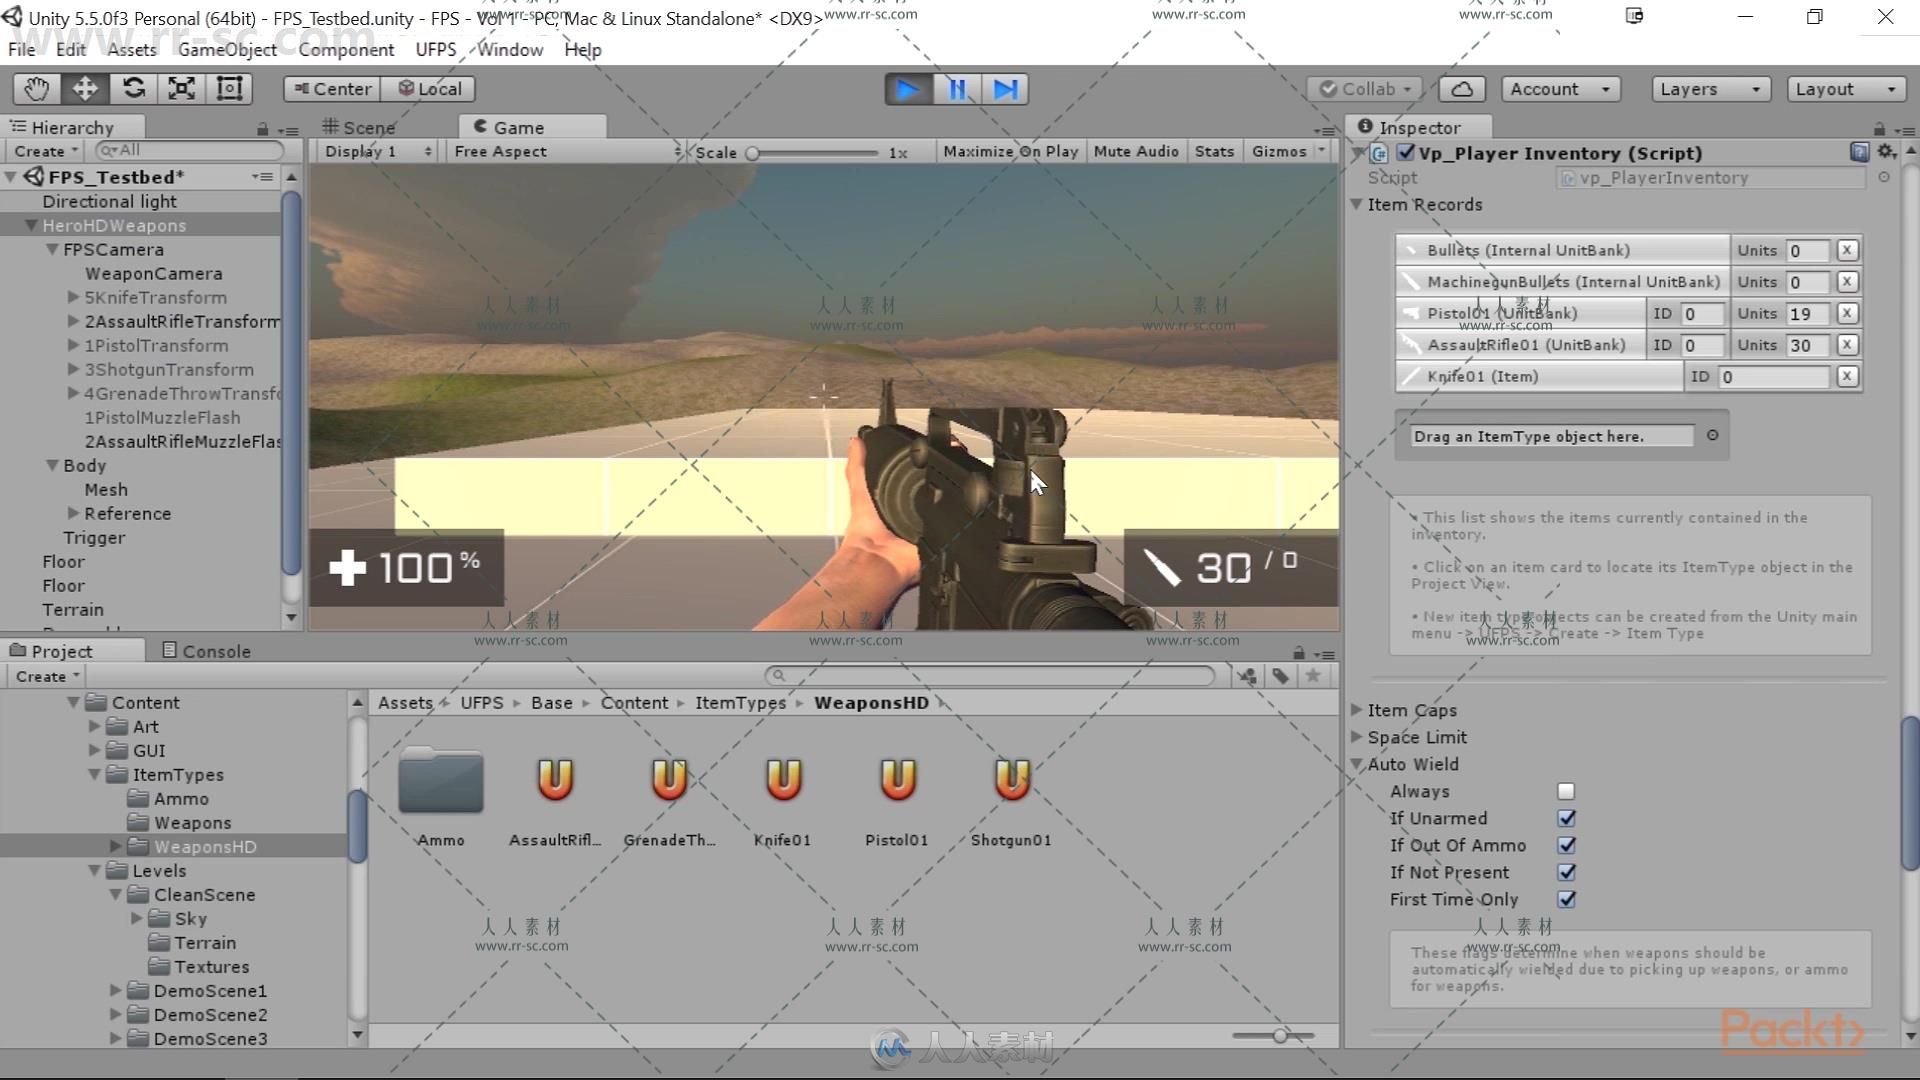 Unity与UFPS框架射击游戏制作视频教程 PACKT PUBLISHING BUILDING AN FPS GAME WIT...